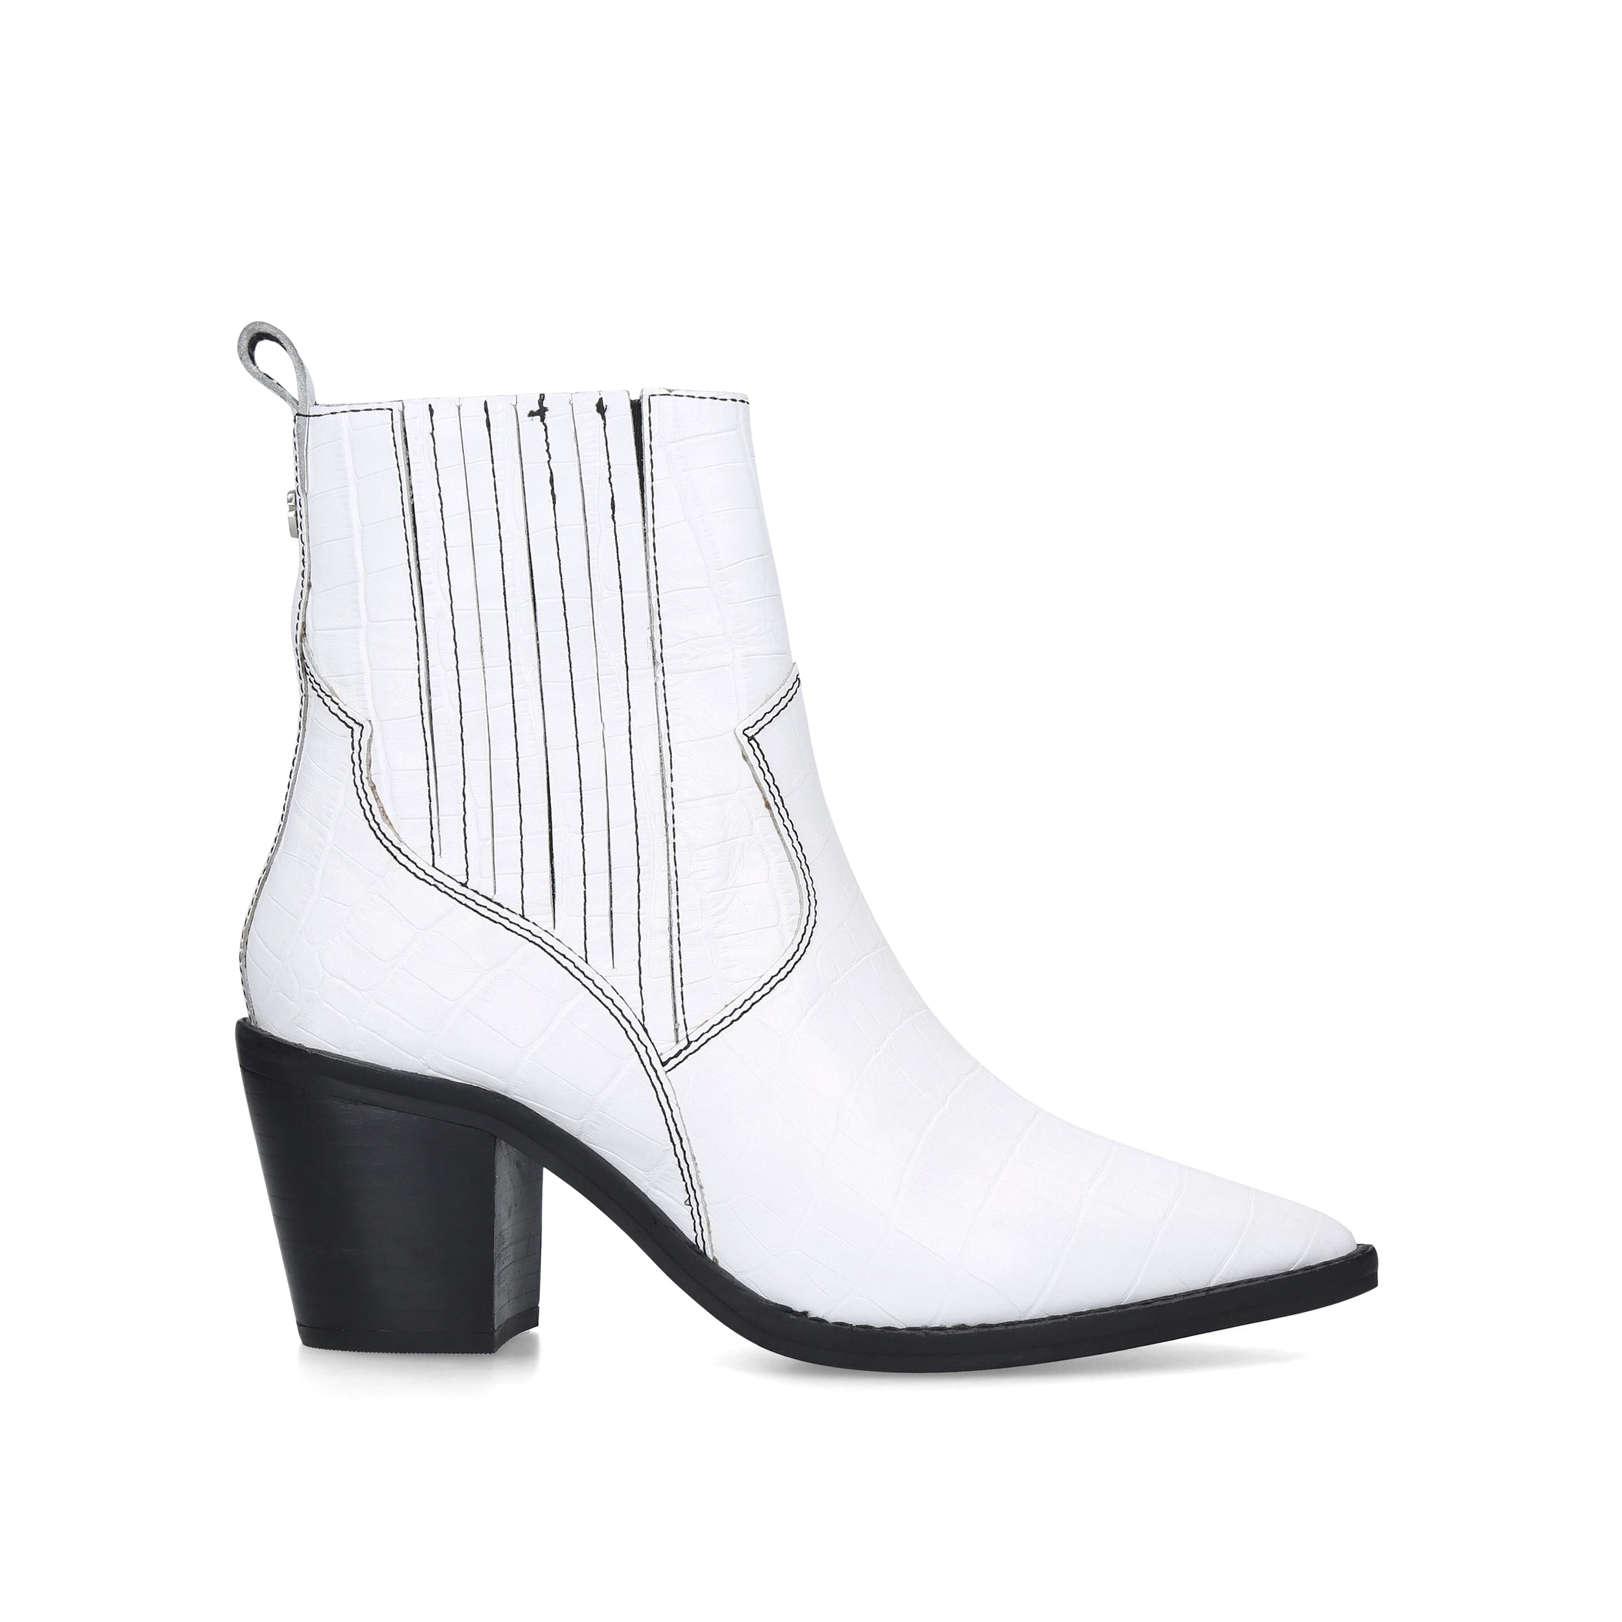 KG by Kurt Geiger Croc Print Western Style Ankle Boots in White | Lyst UK